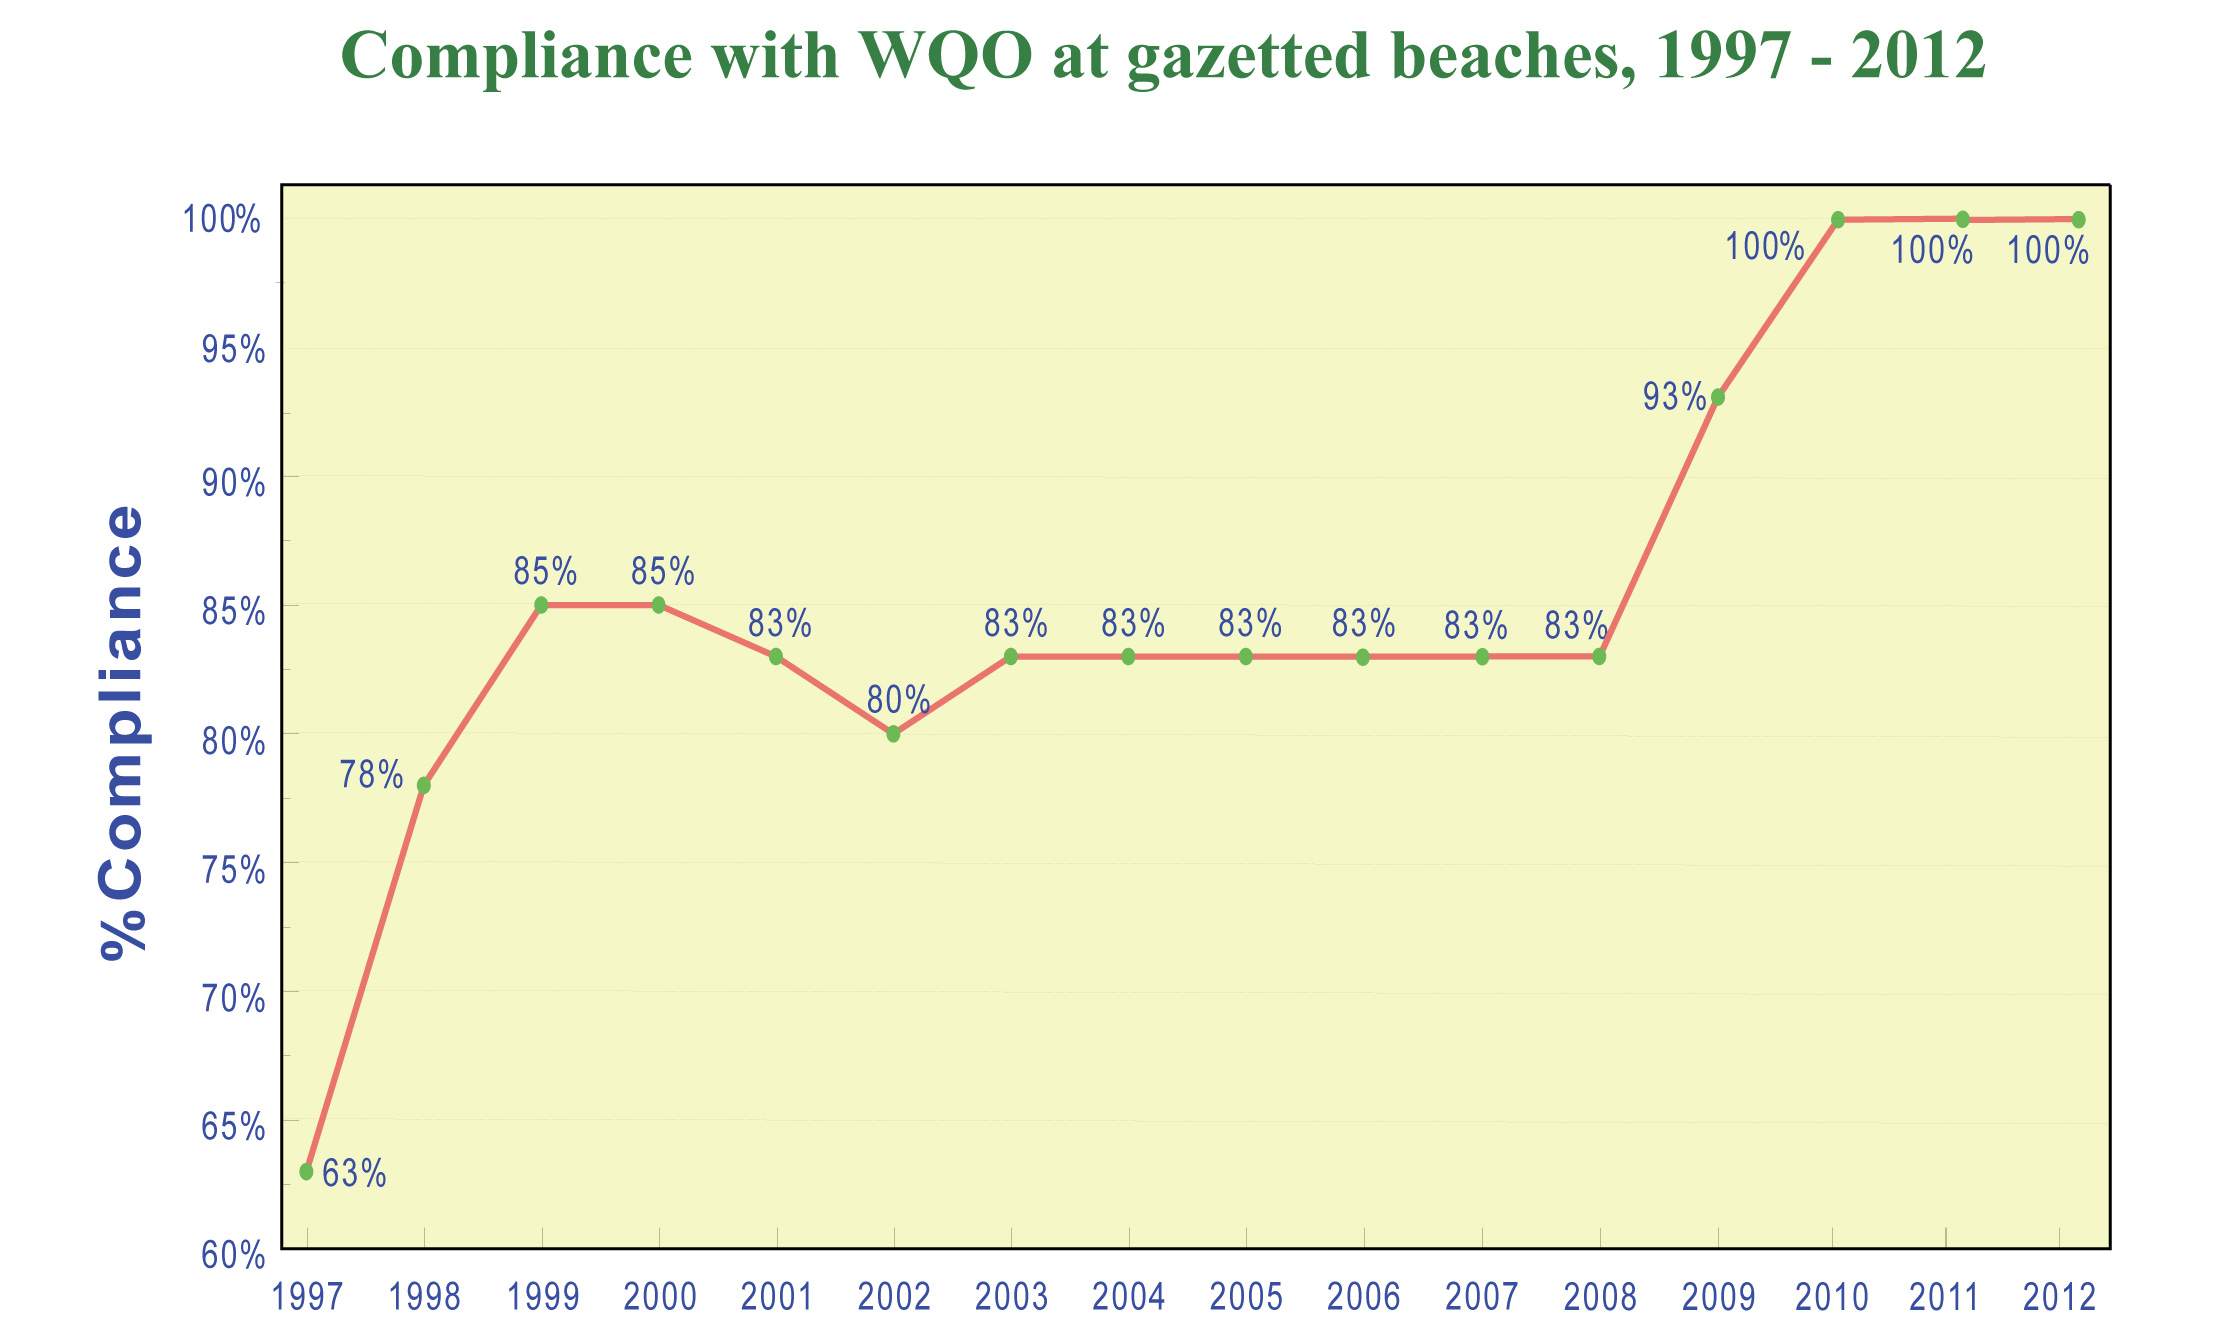 Compliance with the Water Quality Objective at gazetted beaches, 1997-2012